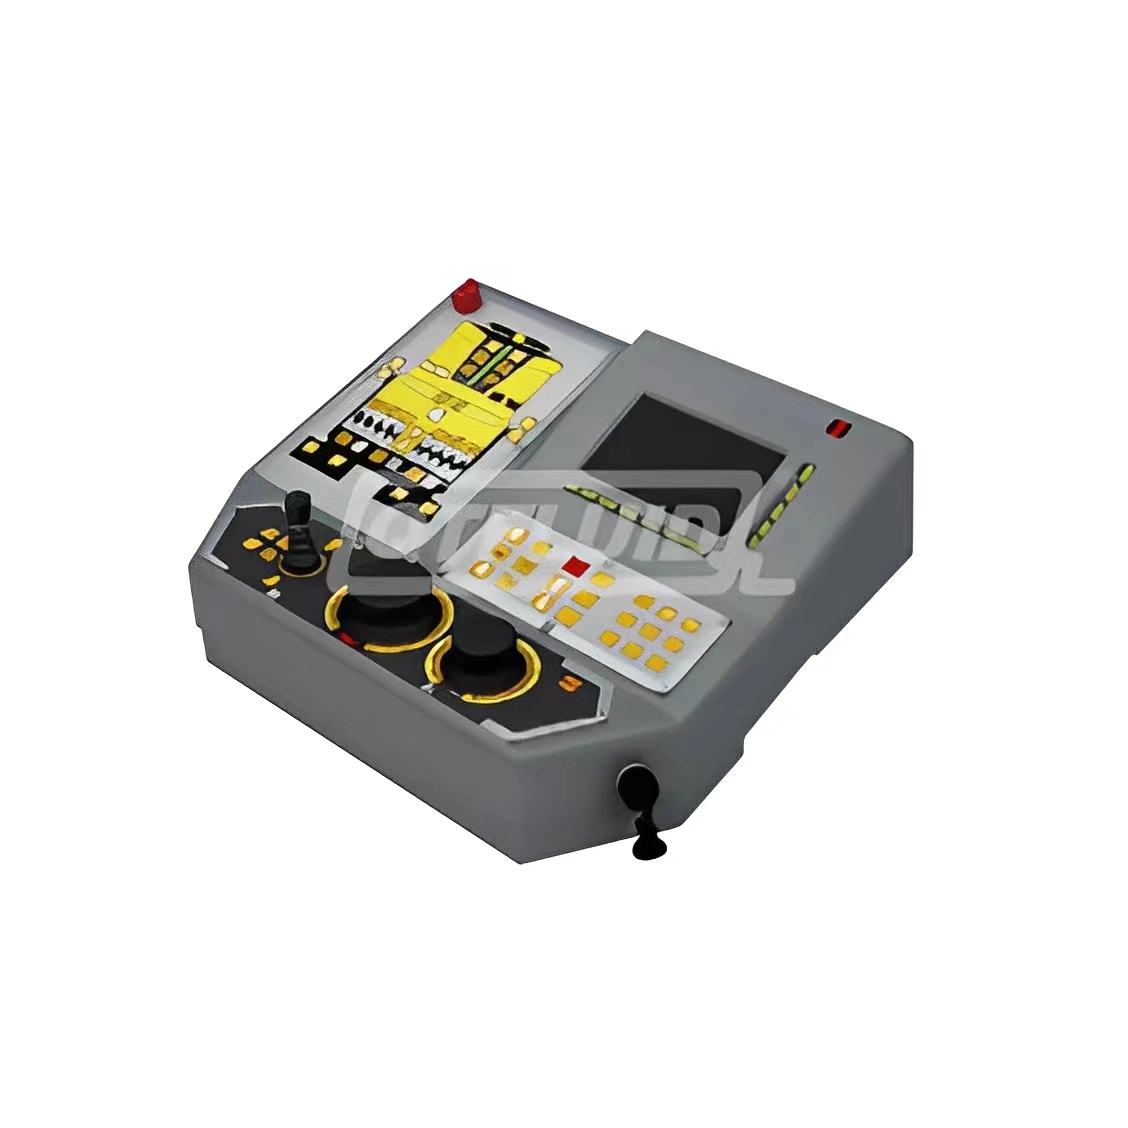 High Protection Electric Control Panel with Display Screen Remote Operation for Truck Crane Use